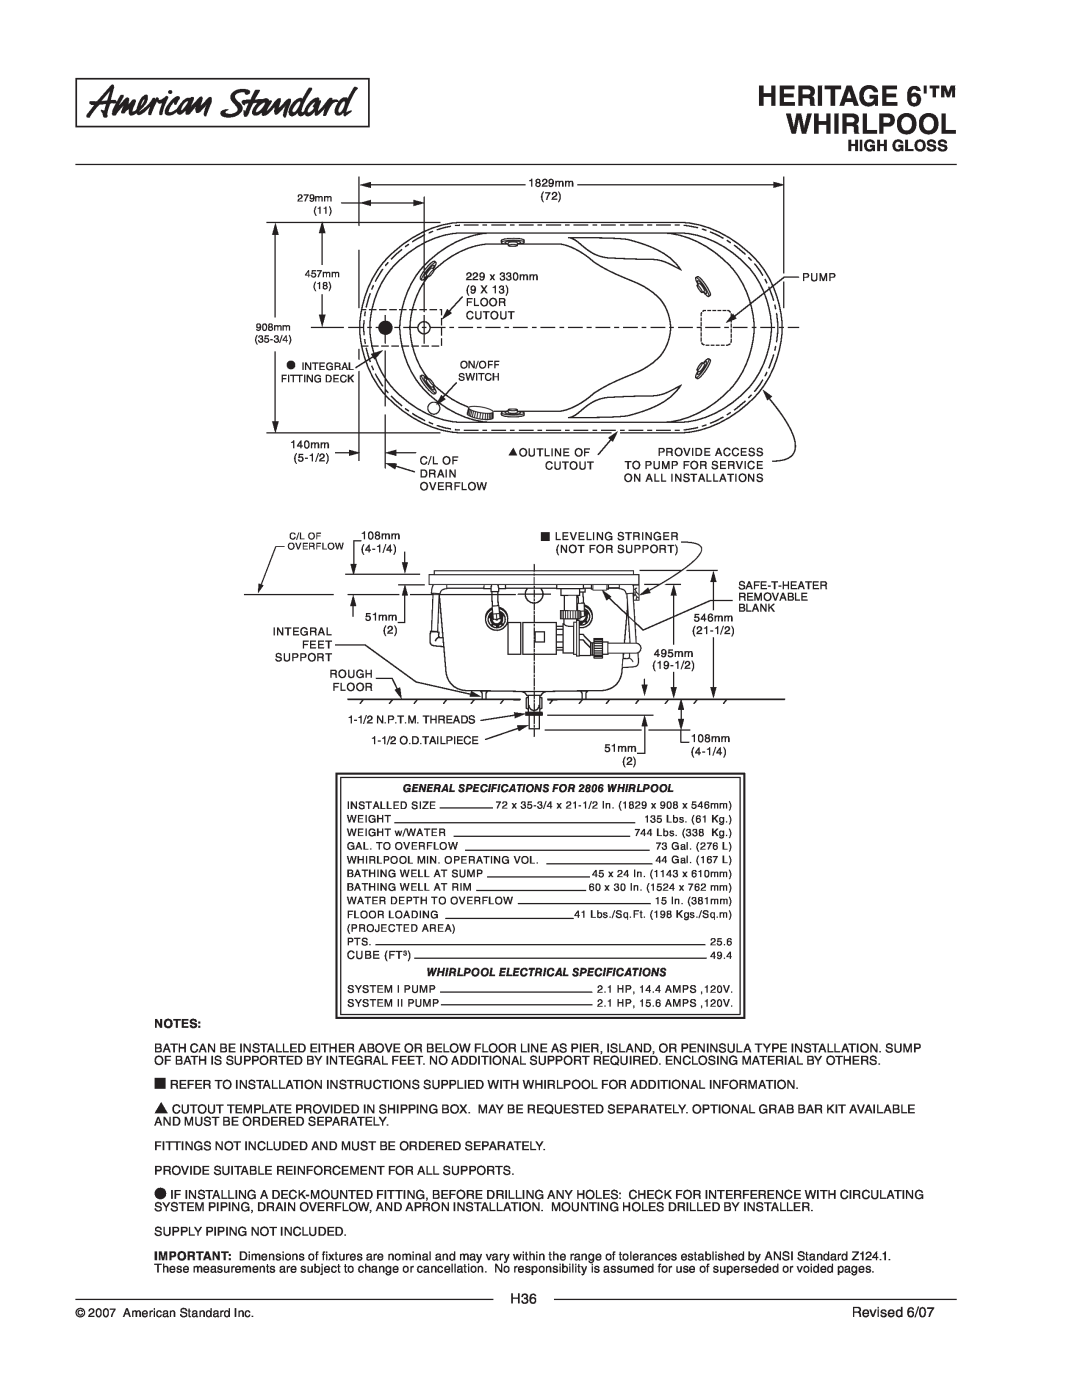 American Standard 2806.028WC, 2806.018WC Heritage Whirlpool, High Gloss, Revised 6/07, Whirlpool Electrical Specifications 